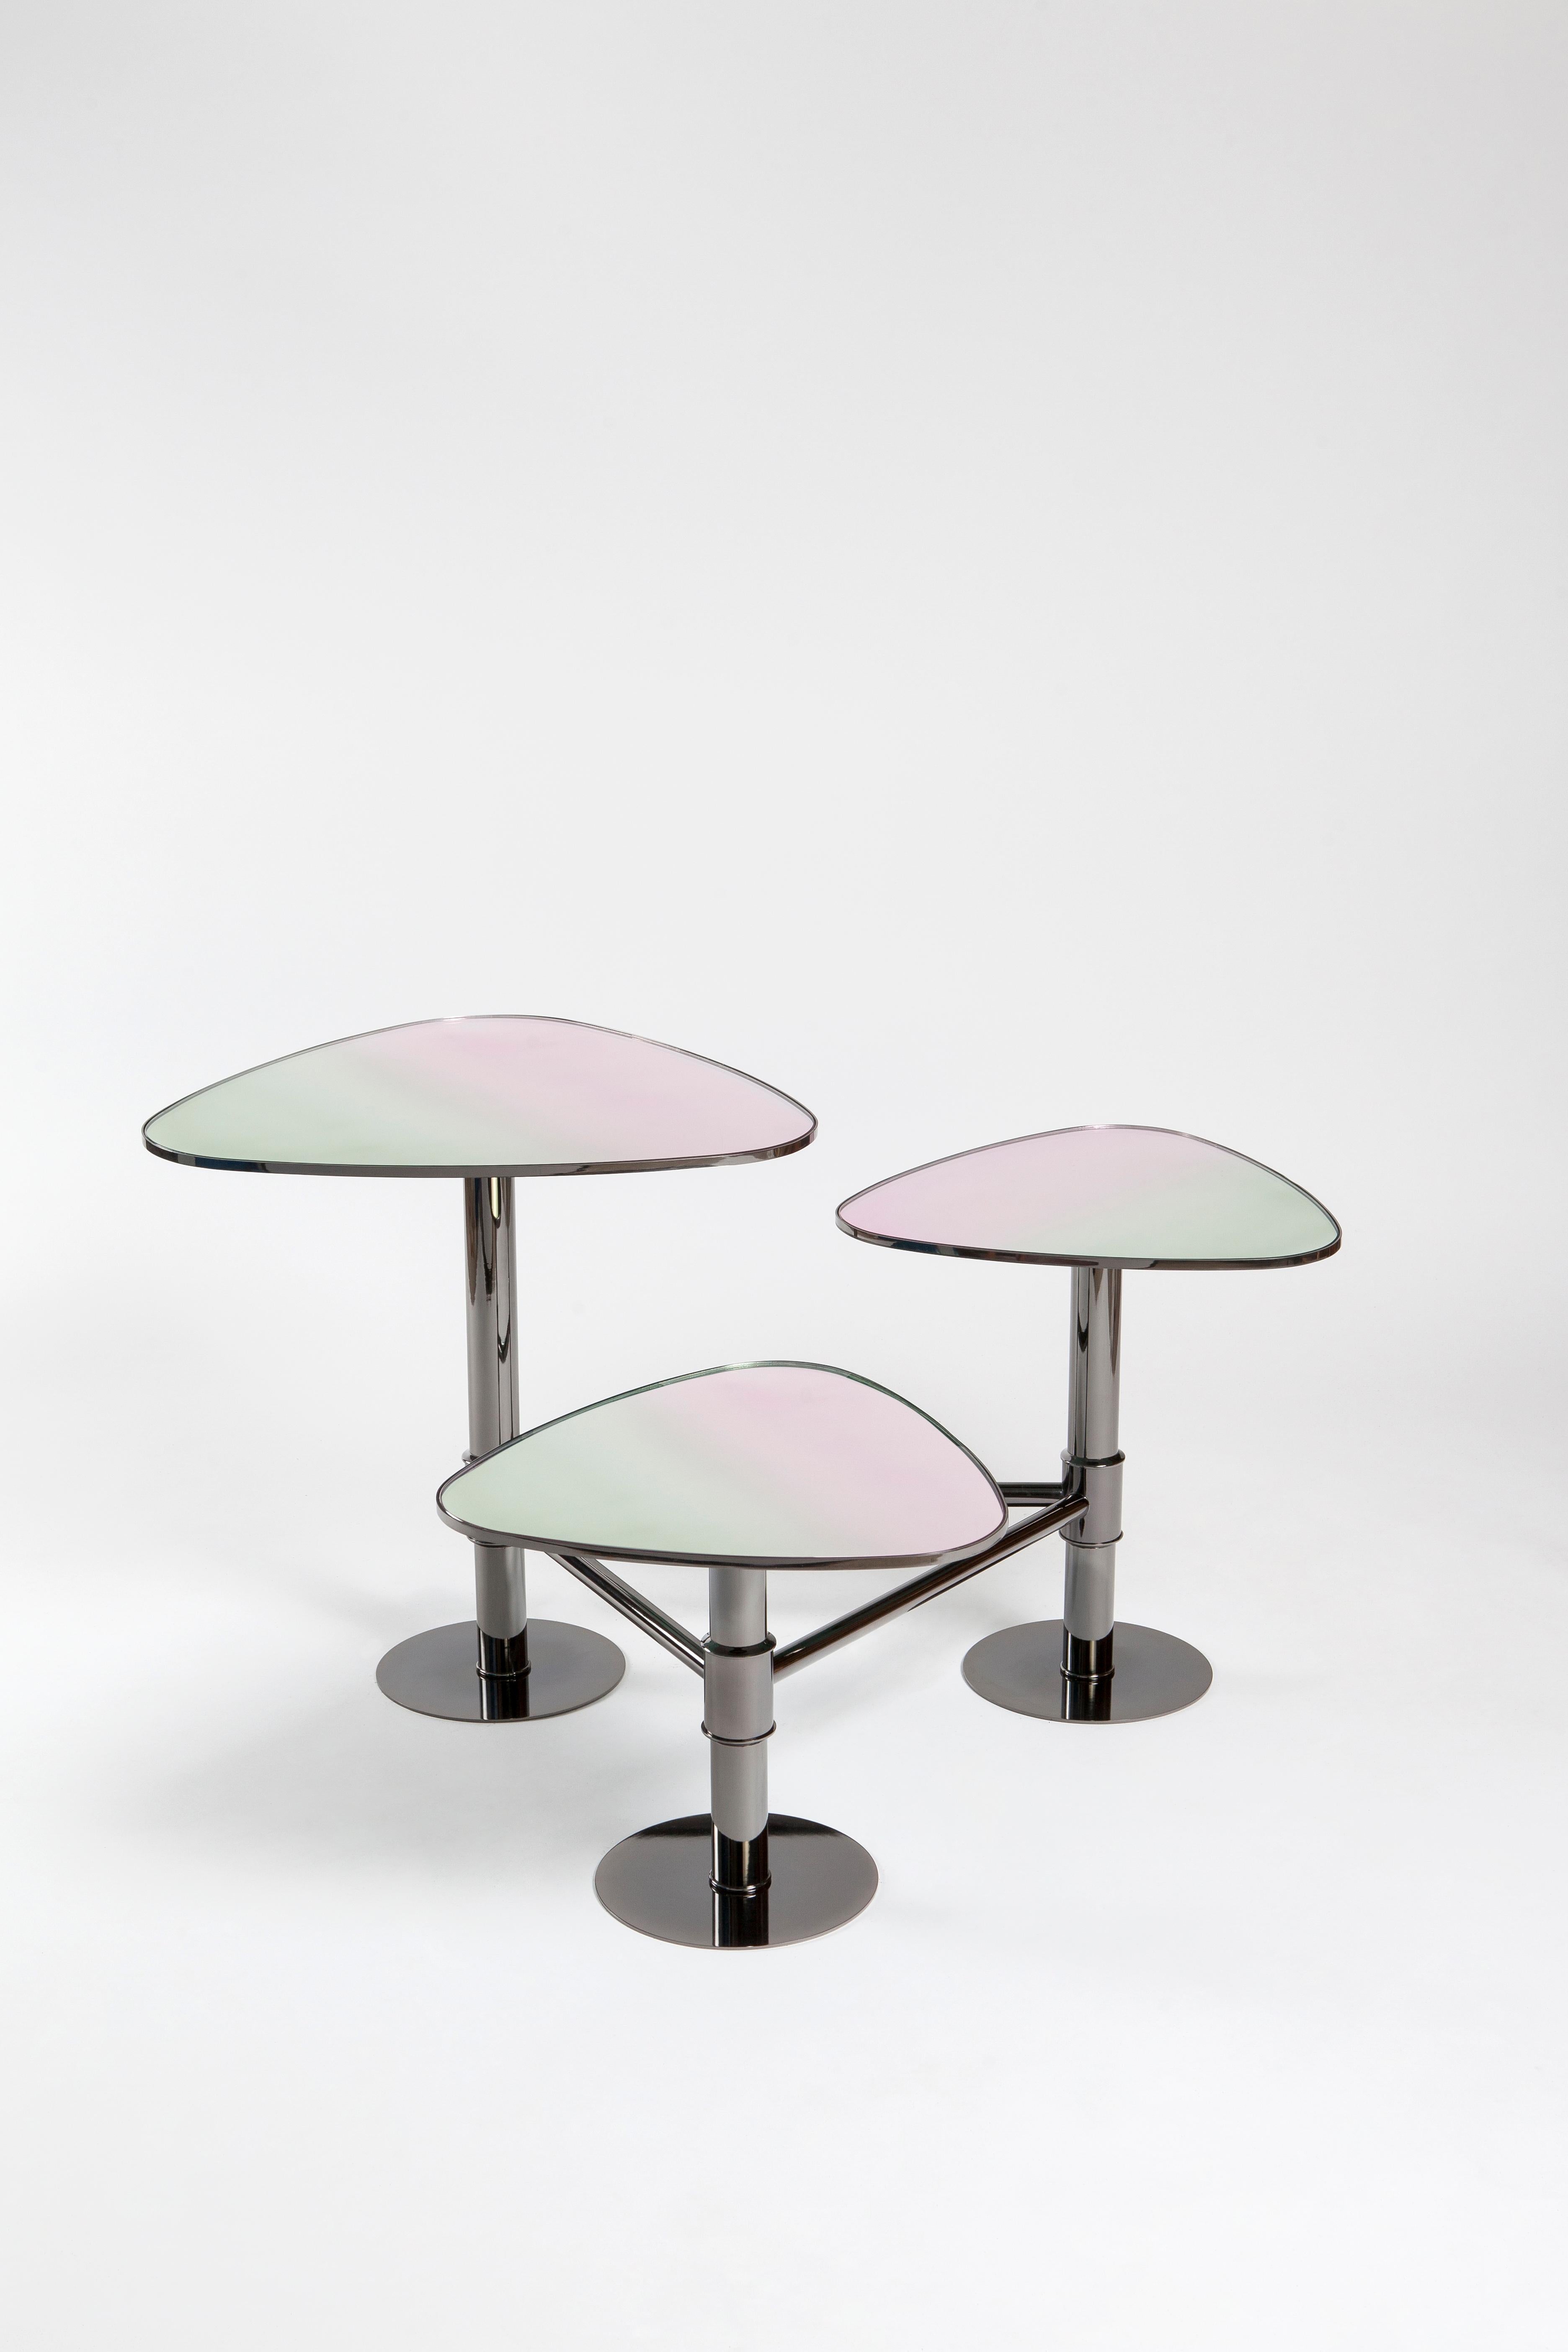 The threefold metal bodied, marble center table of Kontra.    
Center table, coffee table.